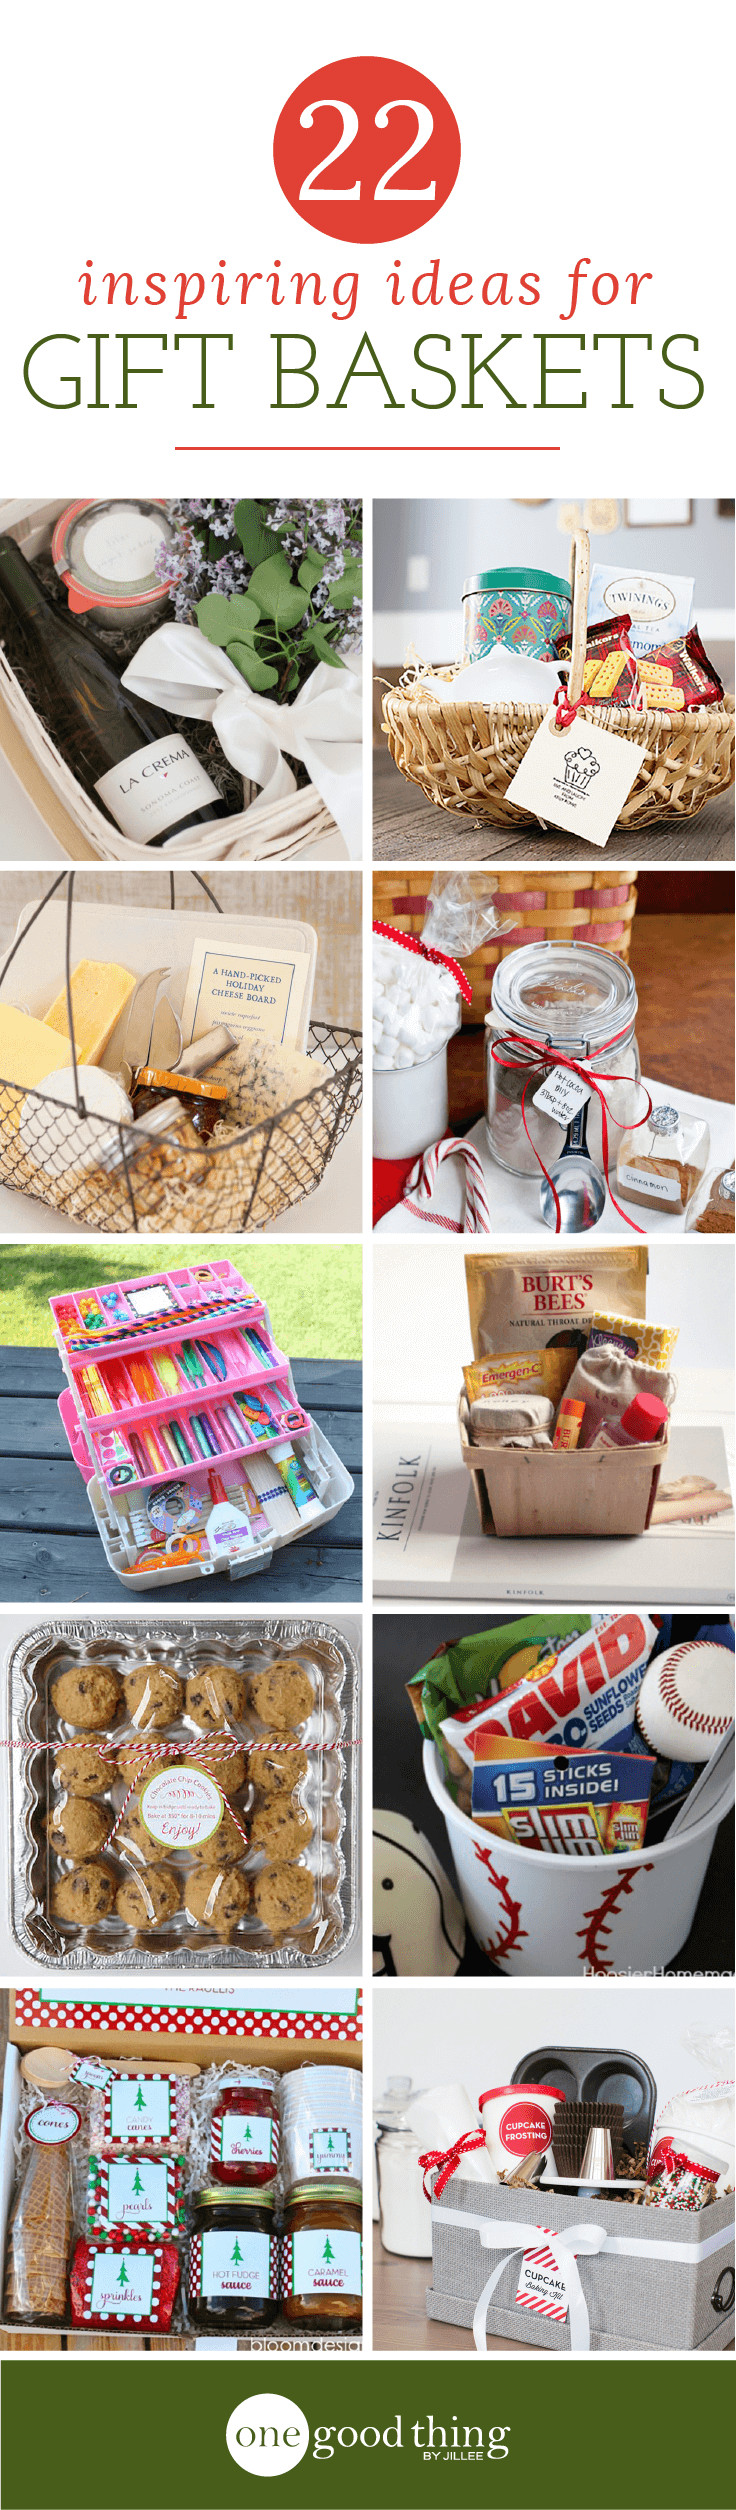 Home Gift Ideas For Couples
 22 Inspiring Gift Basket Ideas That You Can Easily Copy